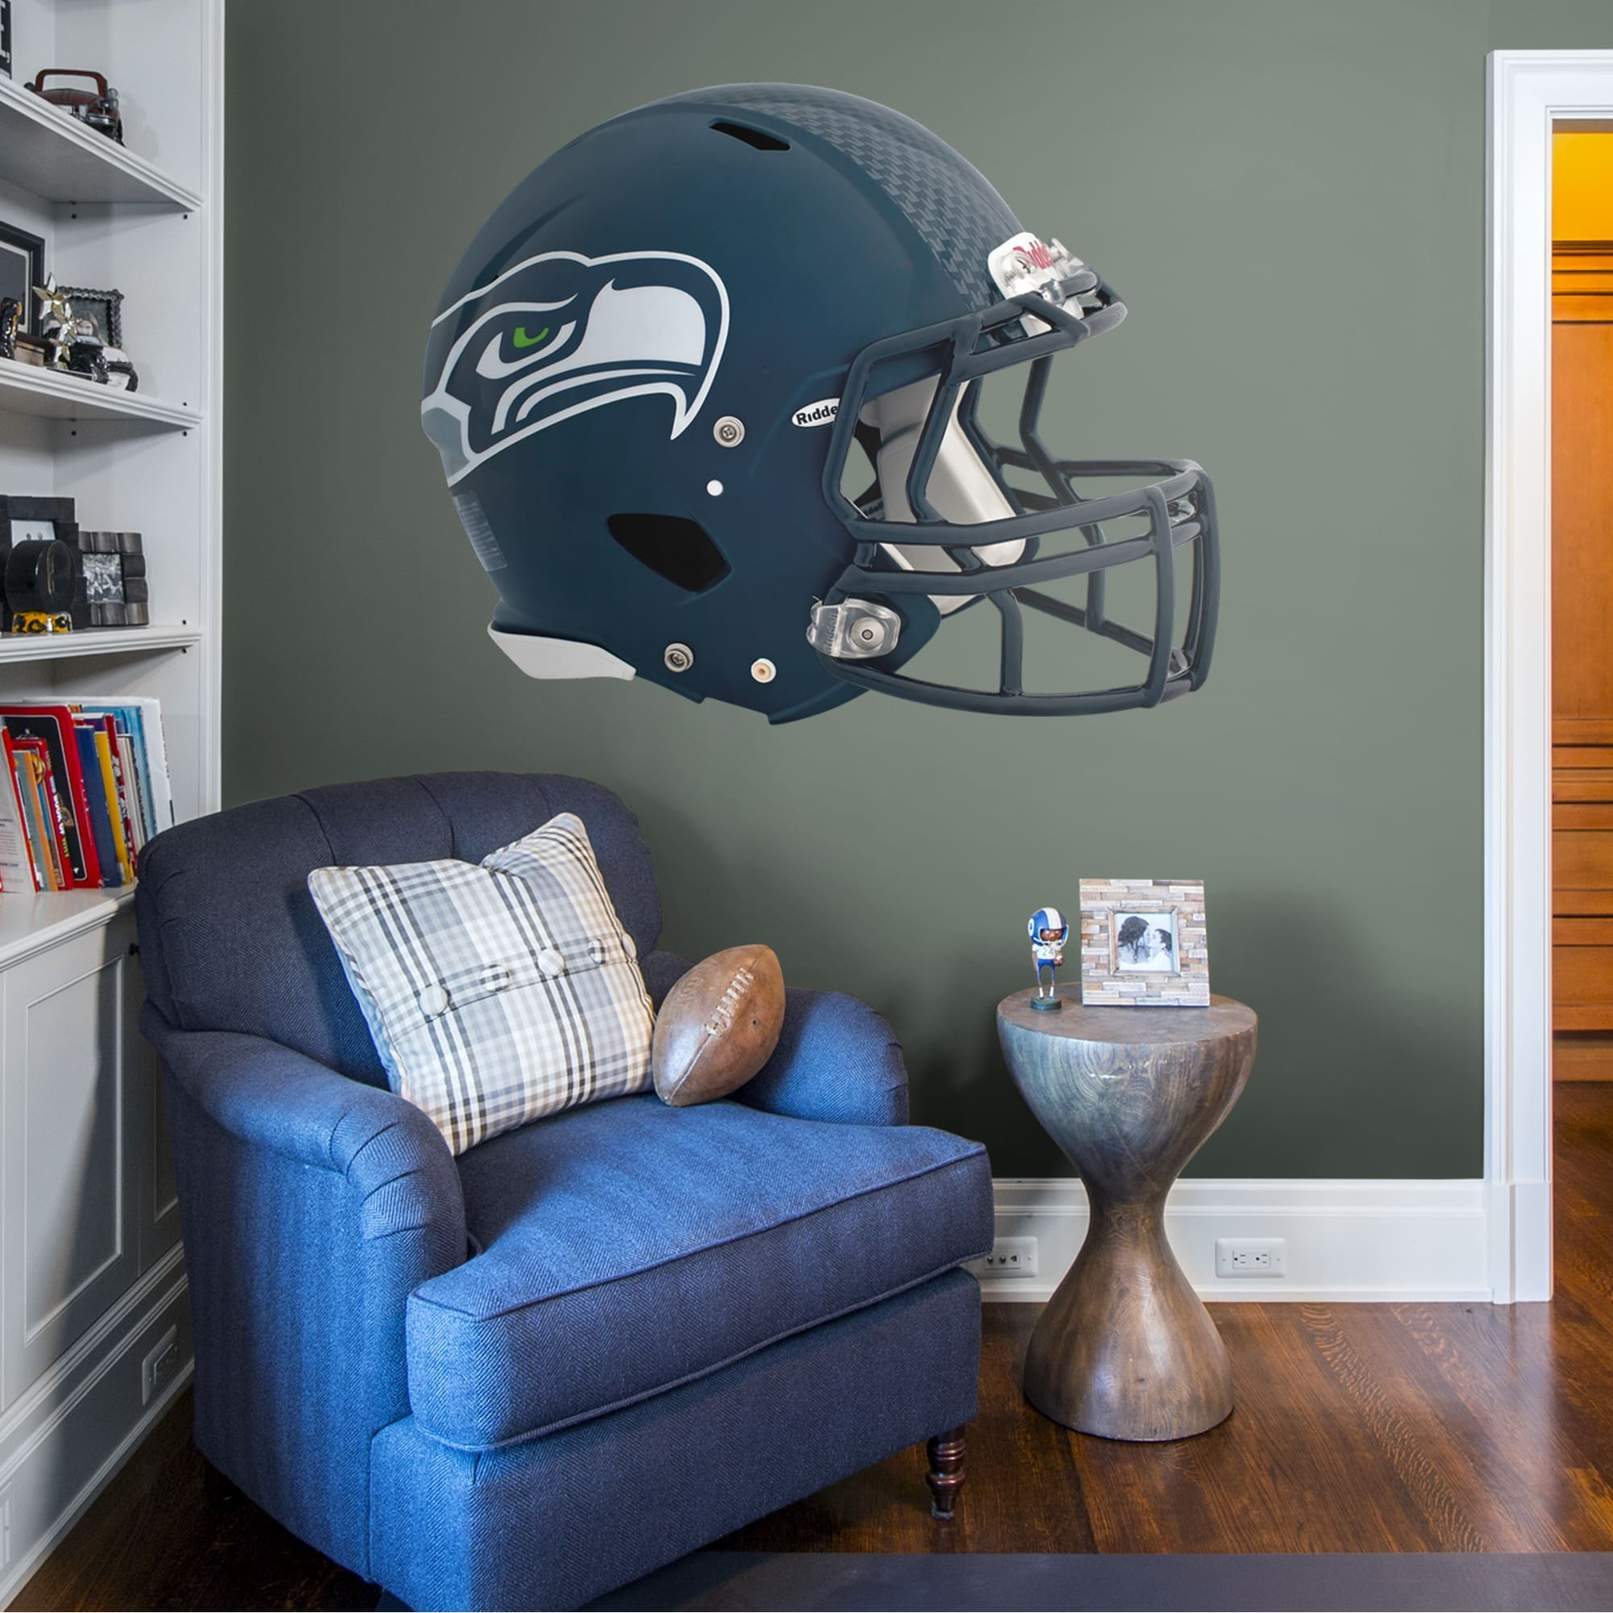 https://fathead.com/products/m11-10075?variant=32963304357976